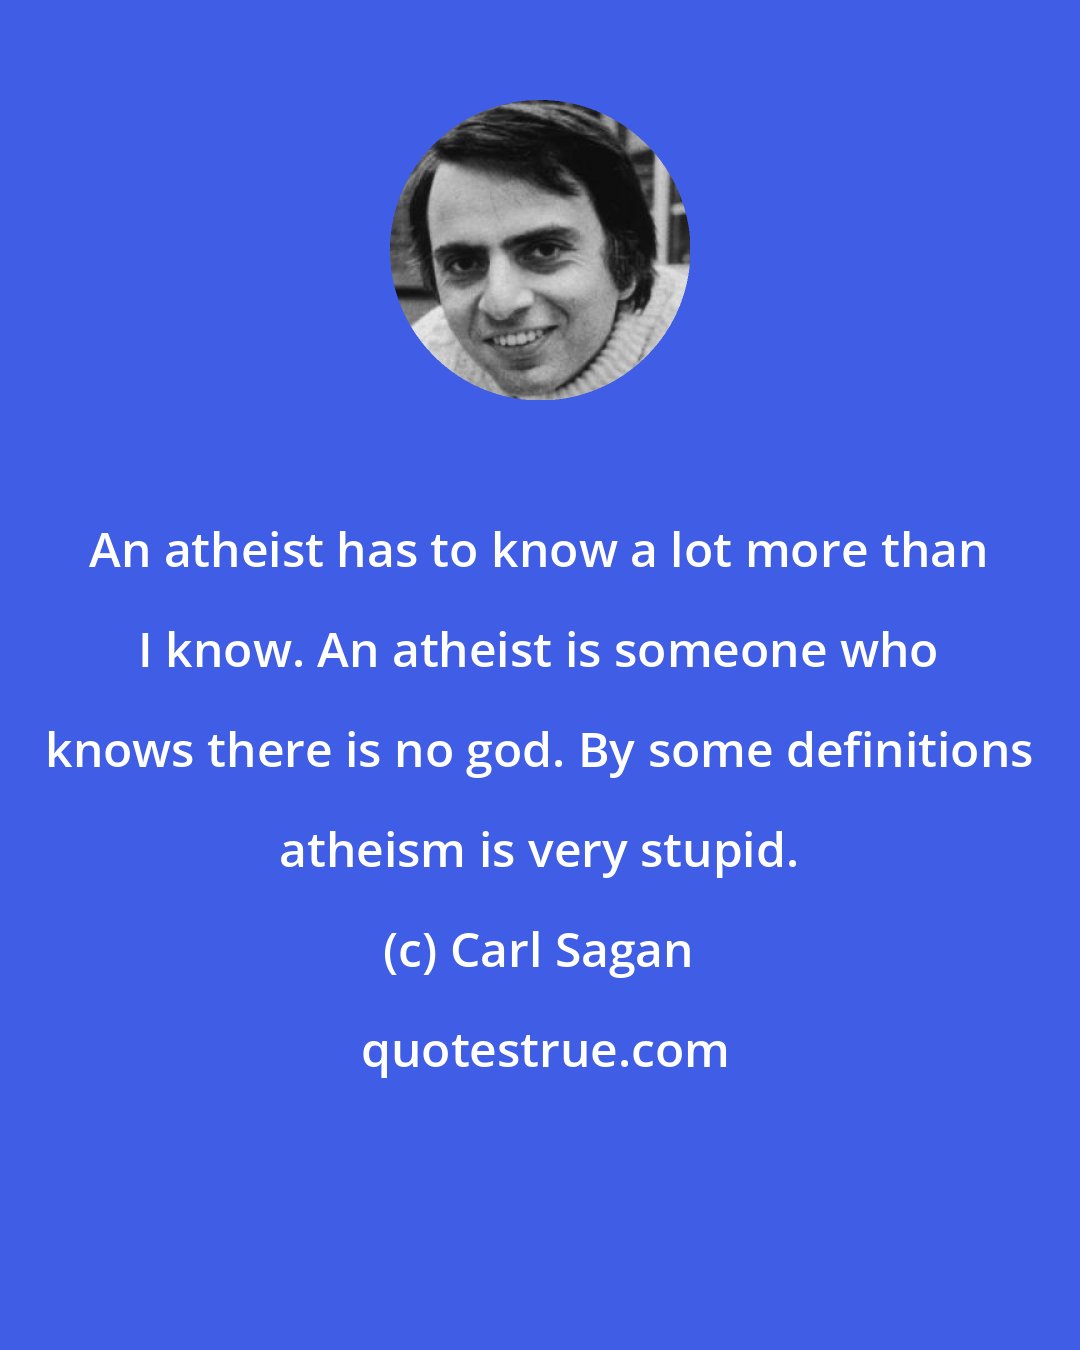 Carl Sagan: An atheist has to know a lot more than I know. An atheist is someone who knows there is no god. By some definitions atheism is very stupid.